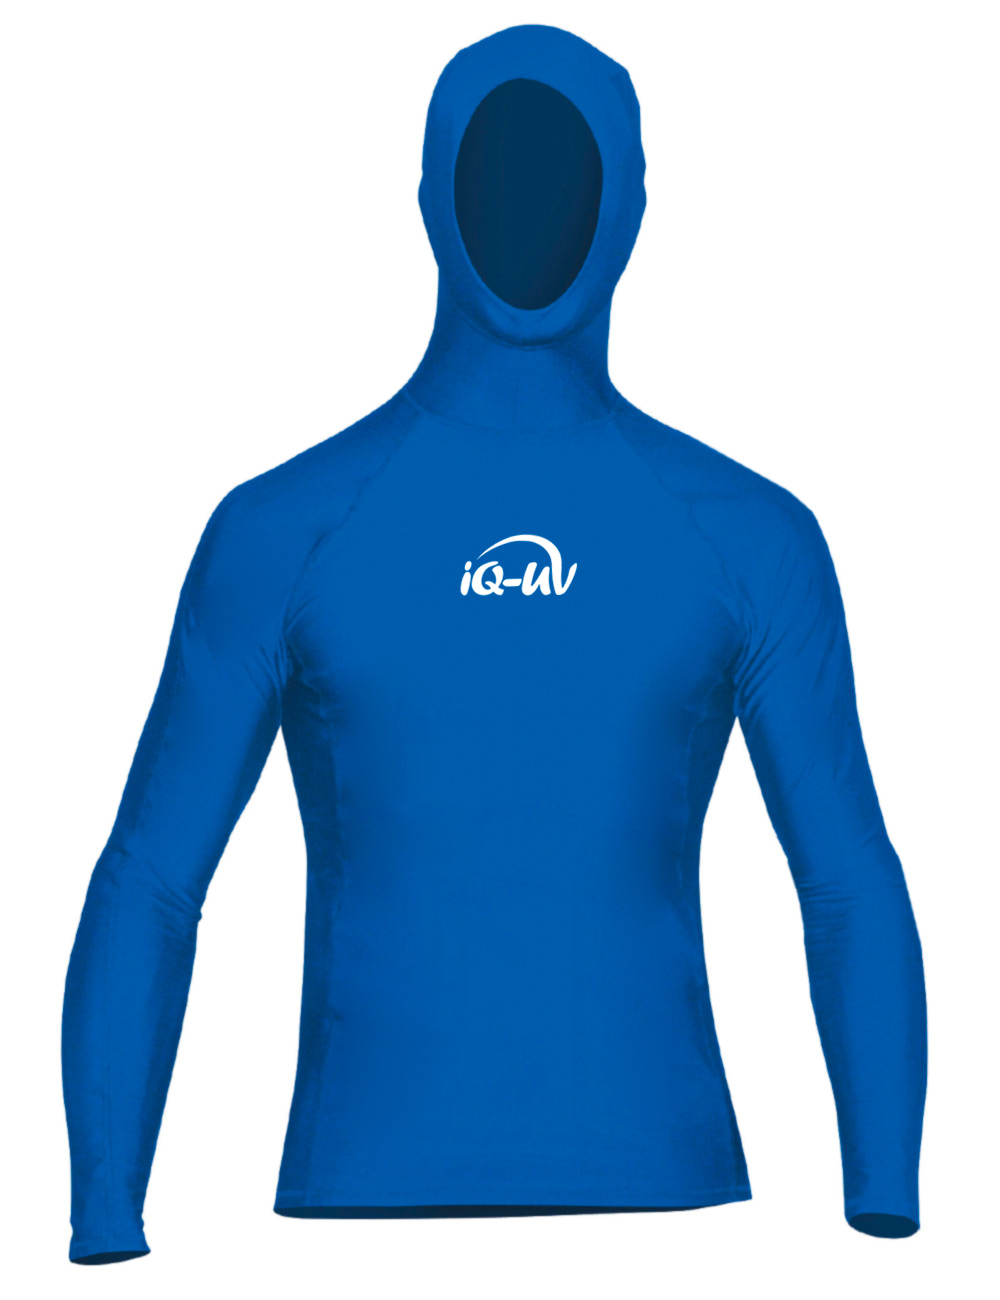 Men's hoodie for diving and snorkelling